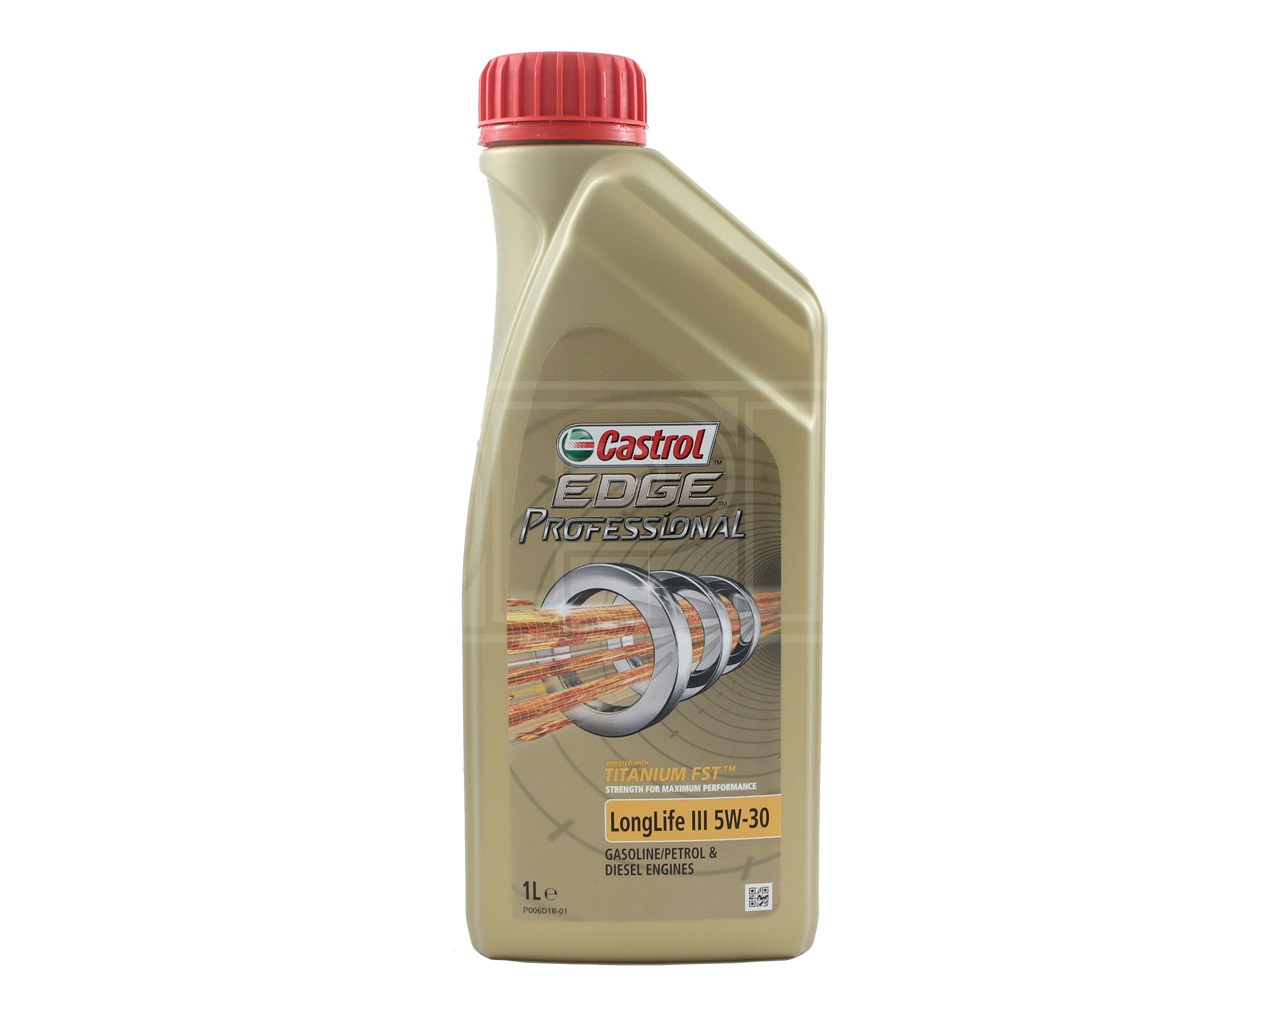 https://cdn.opieoils.co.uk/images/variants/large/castrol/castrol-edge-professional-long-life-iii-5w-30-fully-synthetic-engine-oil-1-litre-1.jpg